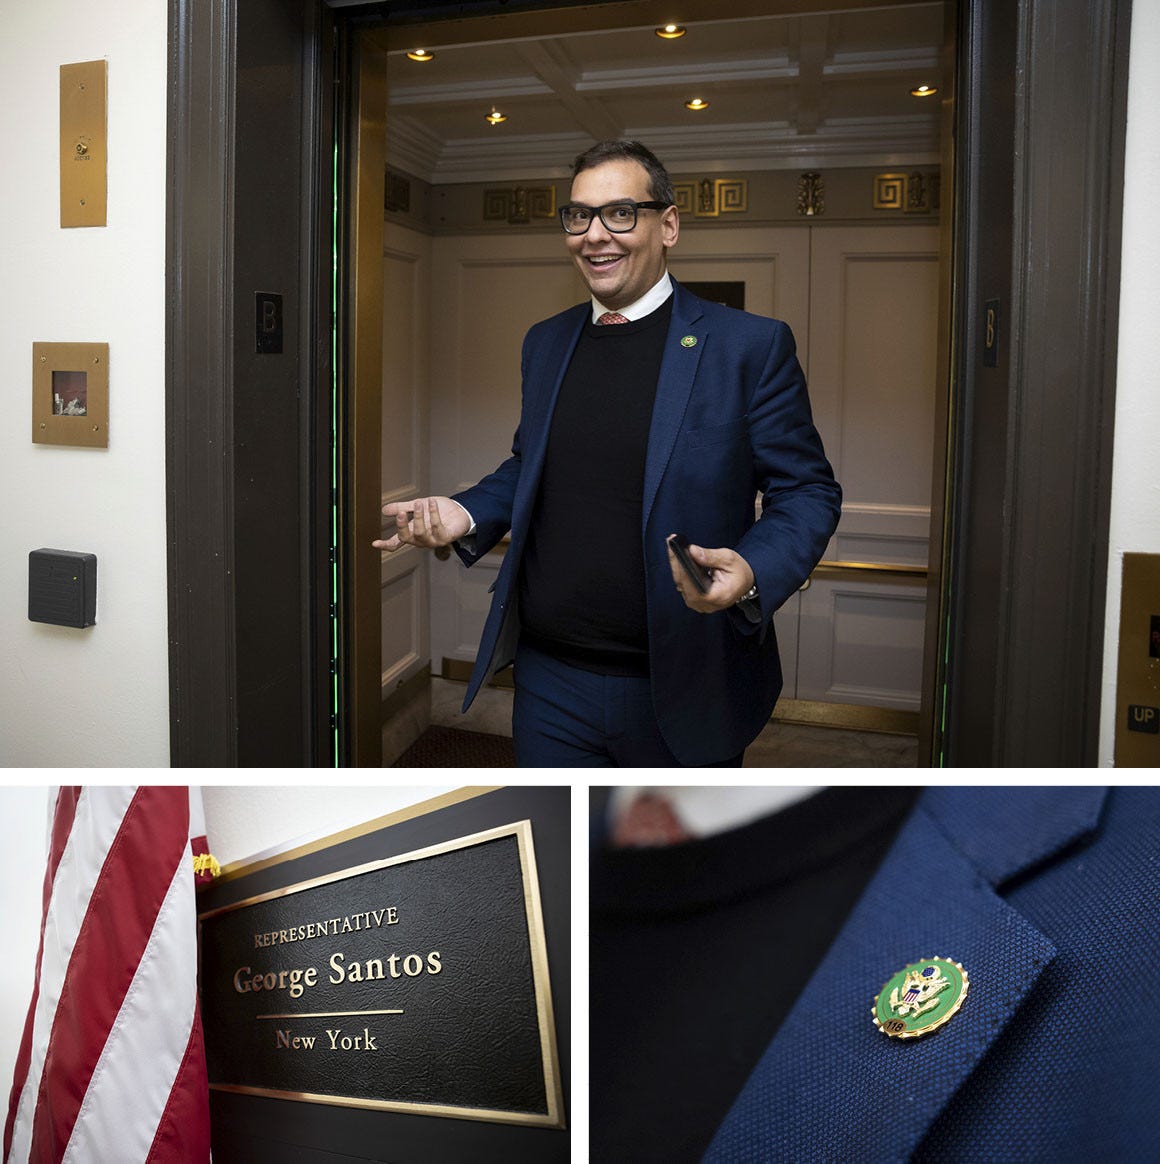 George Santos, top, speaks with reporters as he boards an elevator, a plaque outside his office and wearing his Congressional member lapel pin.